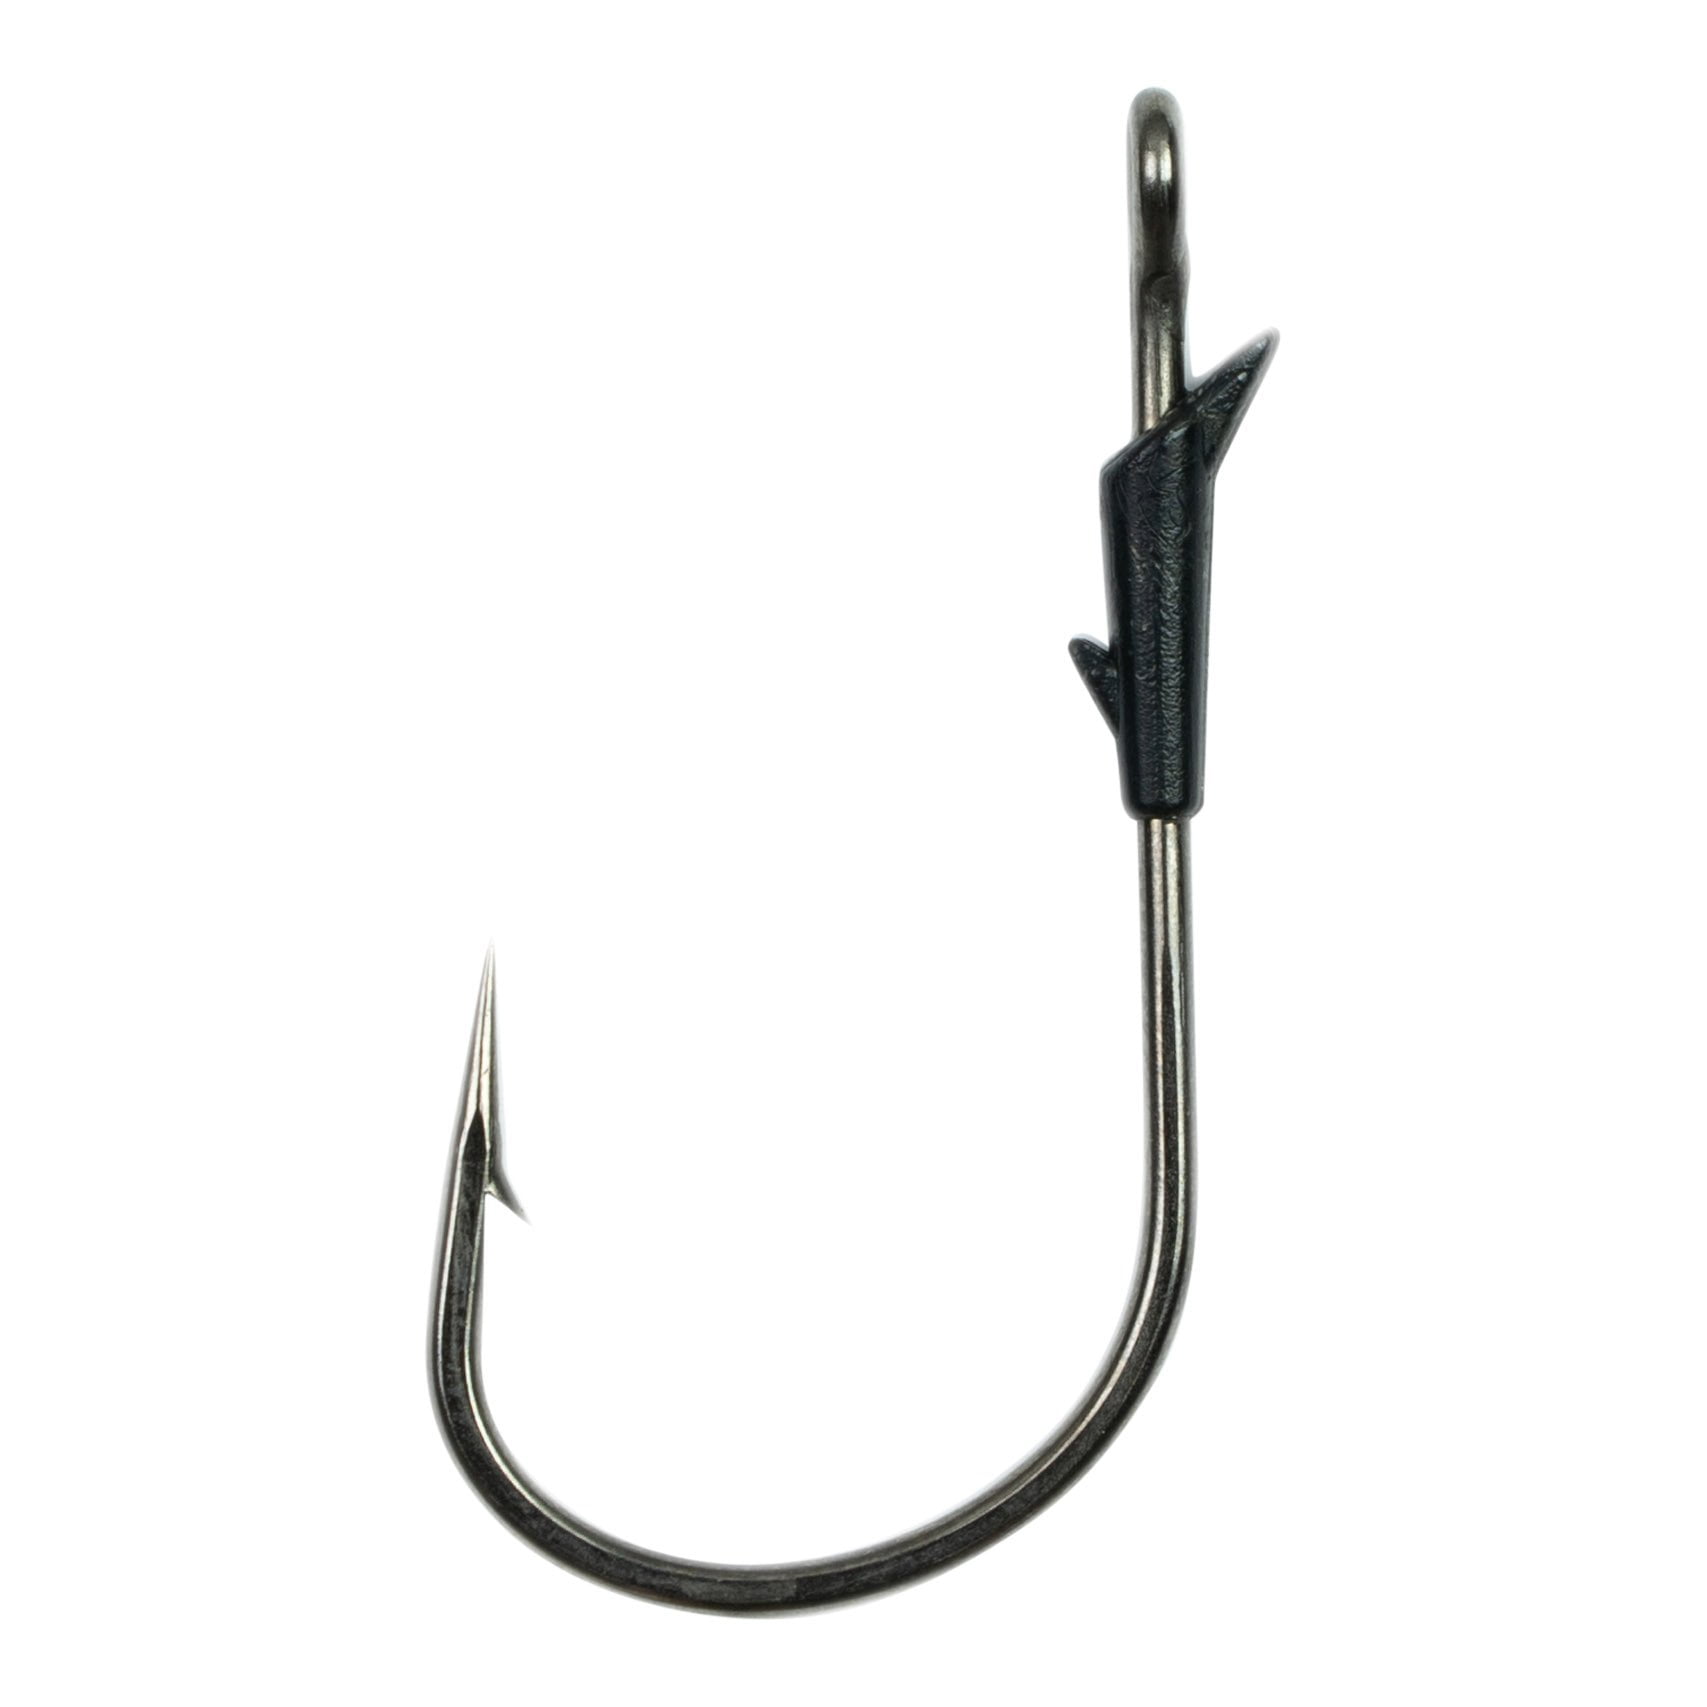 free sample fishing hook, free sample fishing hook Suppliers and  Manufacturers at